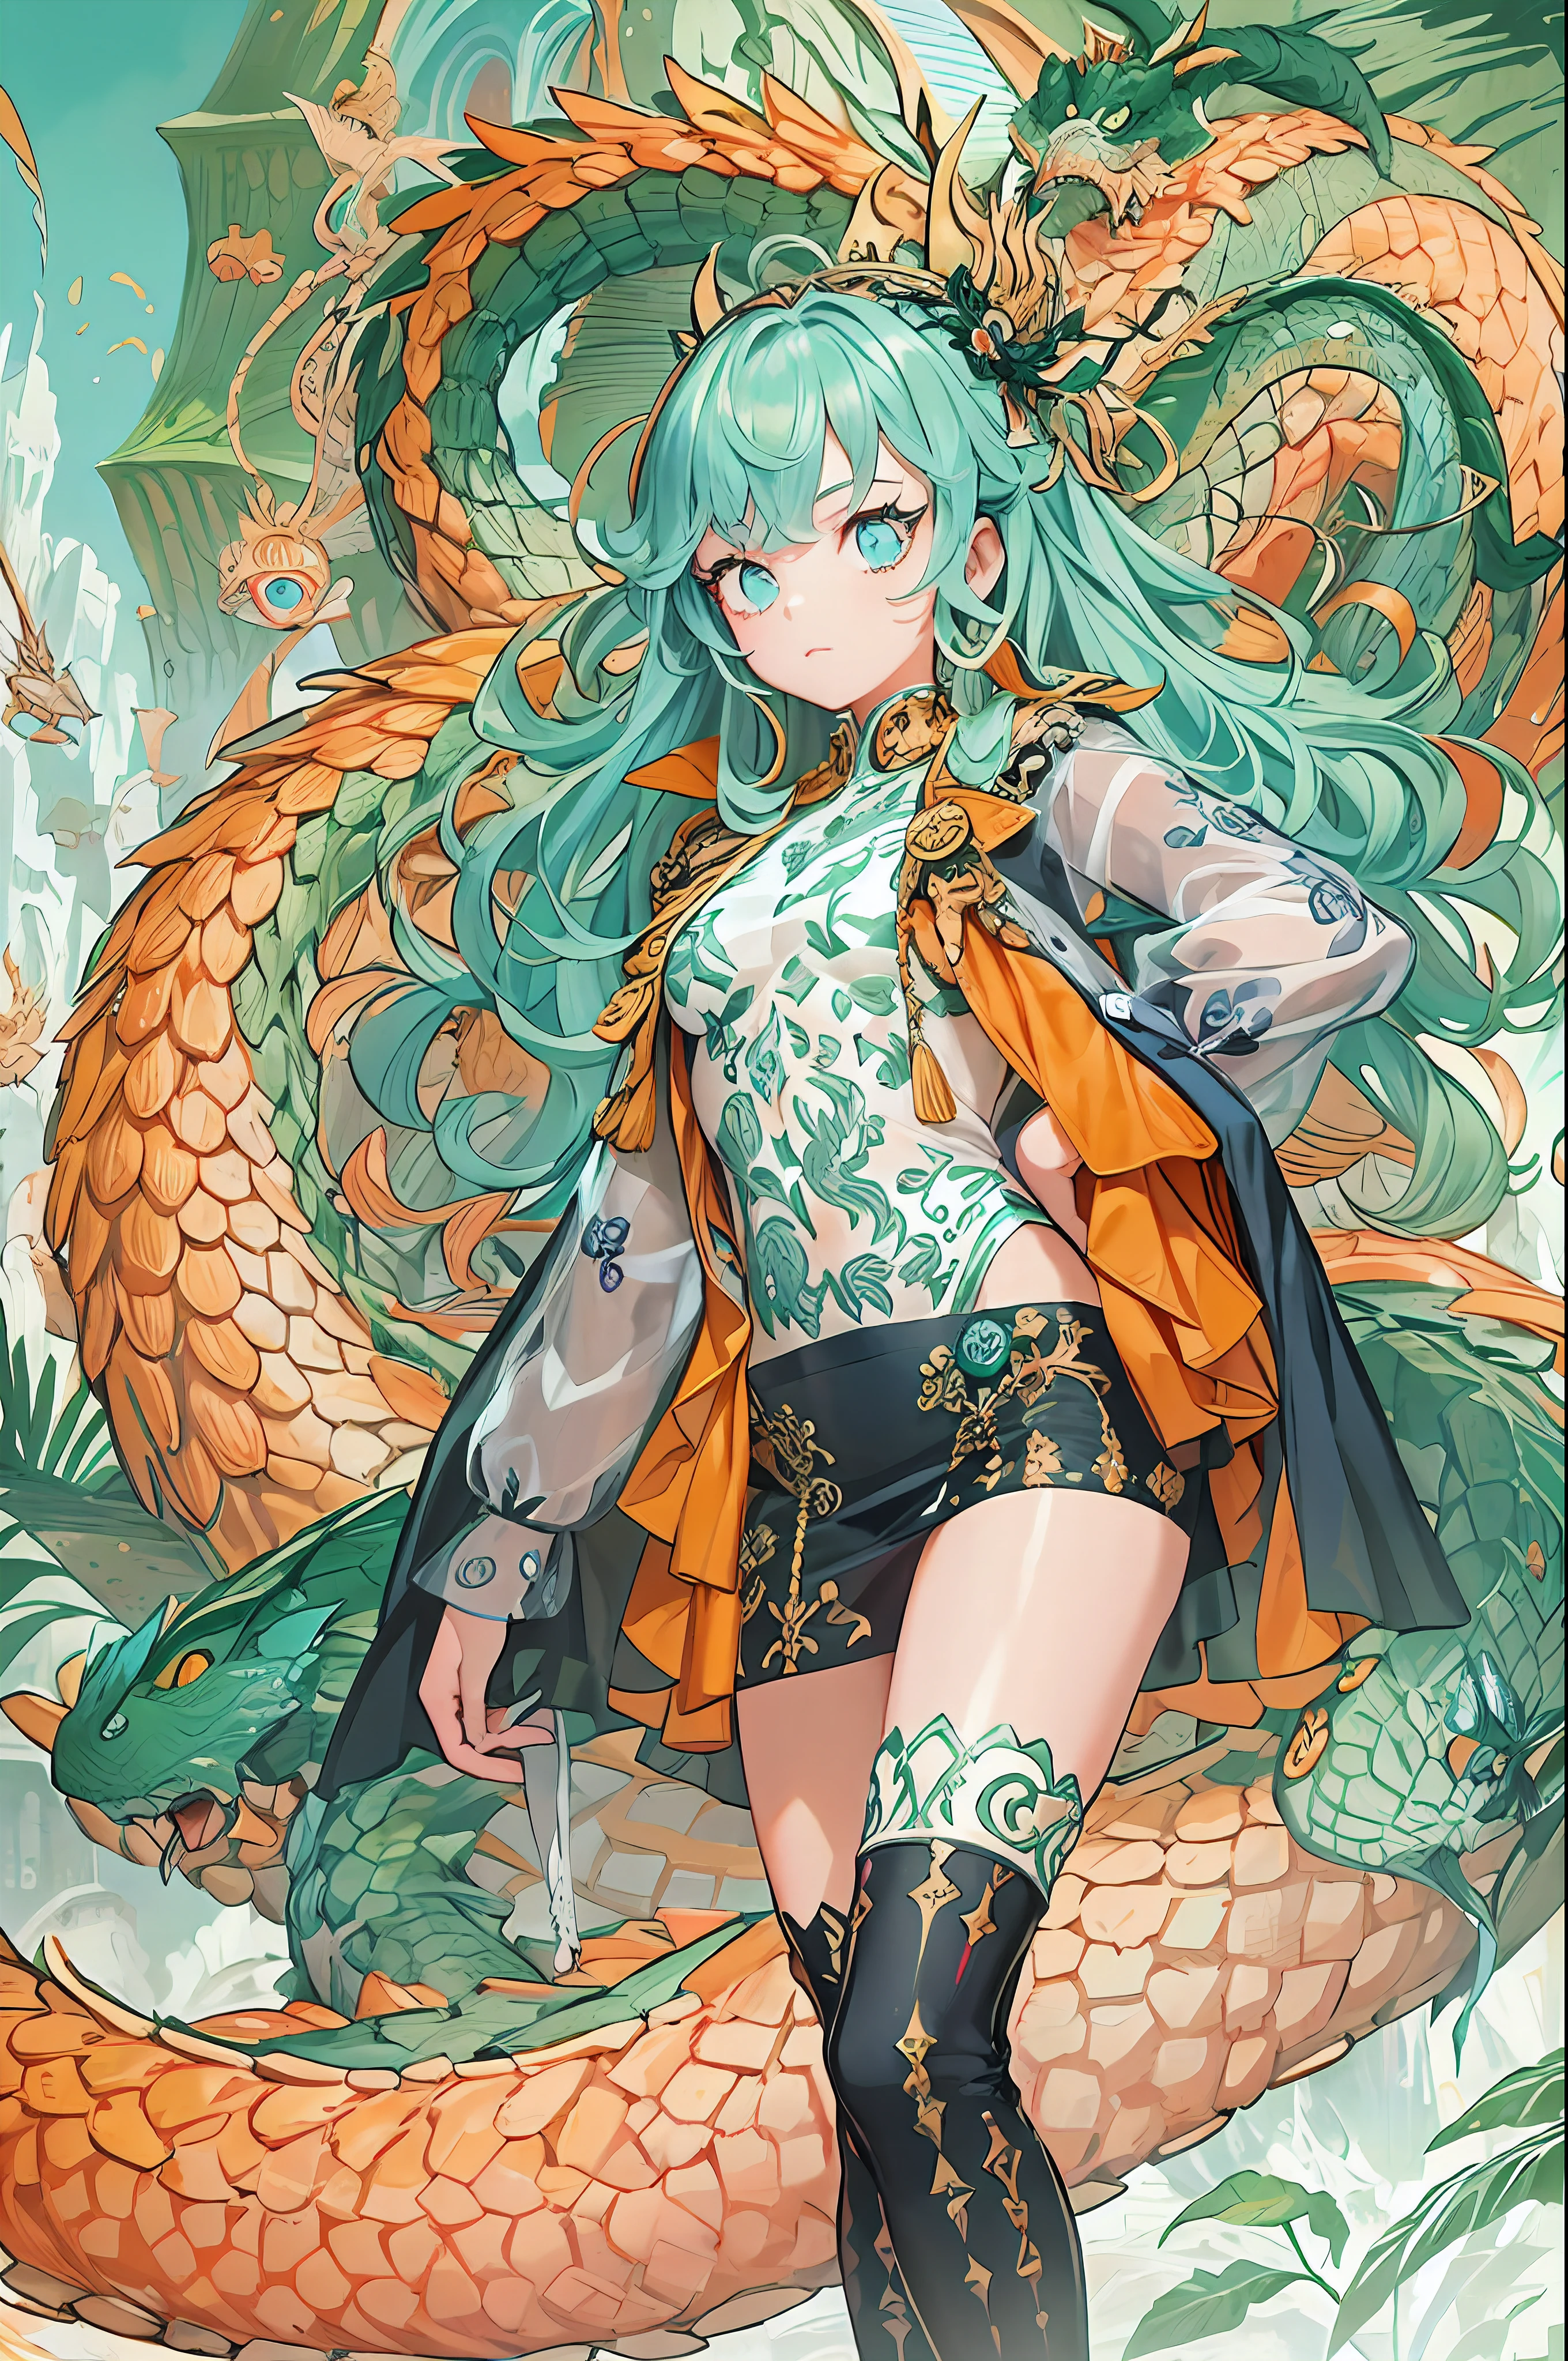 "1 girl with orange and blue hair and bright silver eyes, Wear modern and stylish clothing, Have super curly hair. She strikes a cute floating pose, Surrounded by magnificent and detailed backgrounds. There is also a dragon with green scales and red eyes in the scene."